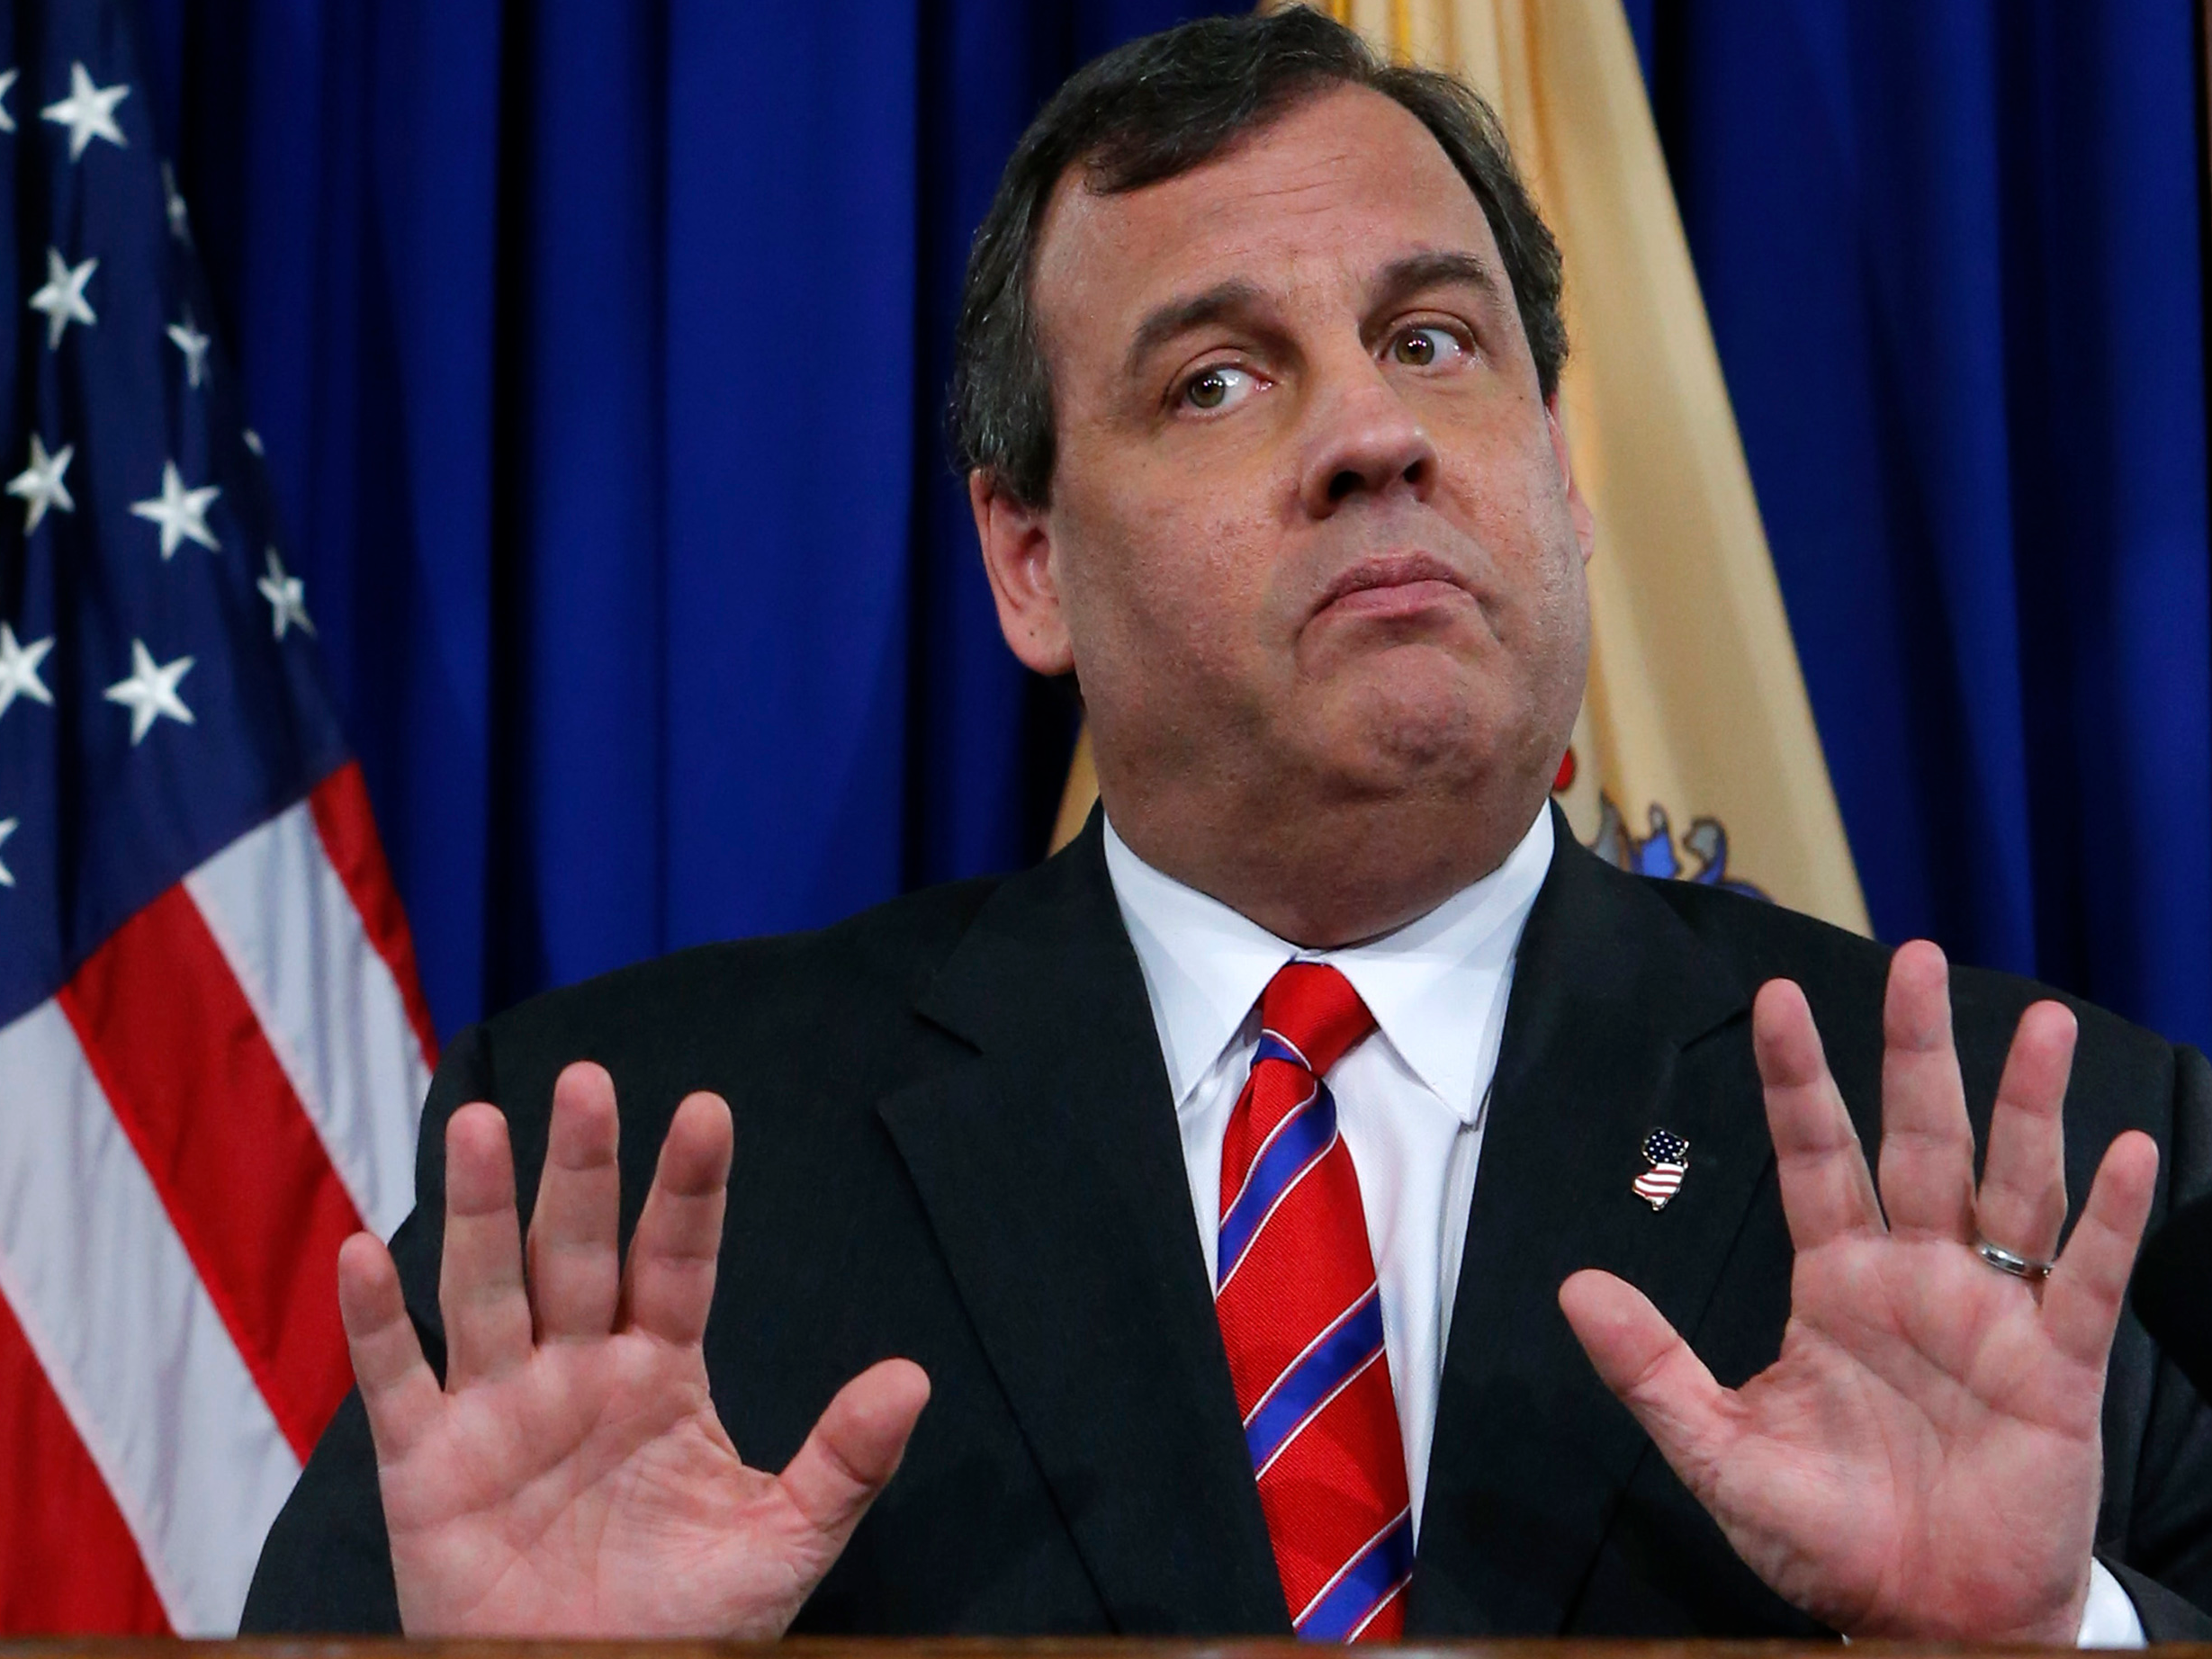 donald-trump-unloads-on-chris-christie-with-multipronged-attack.jpg